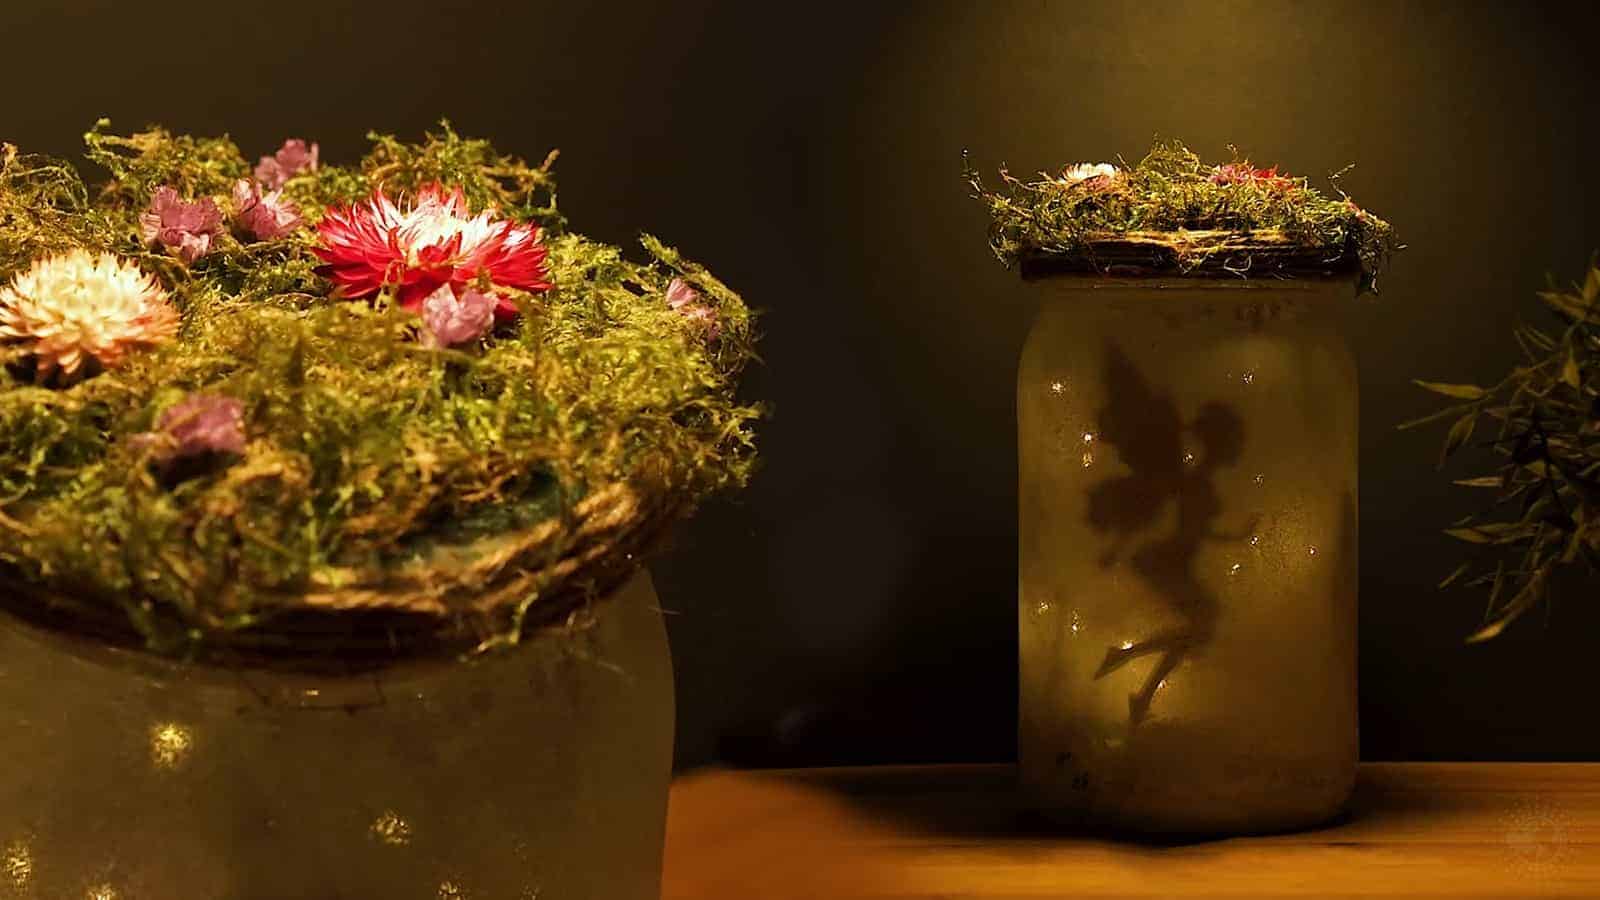 How to Make a Mason Jar from Fairy Lights